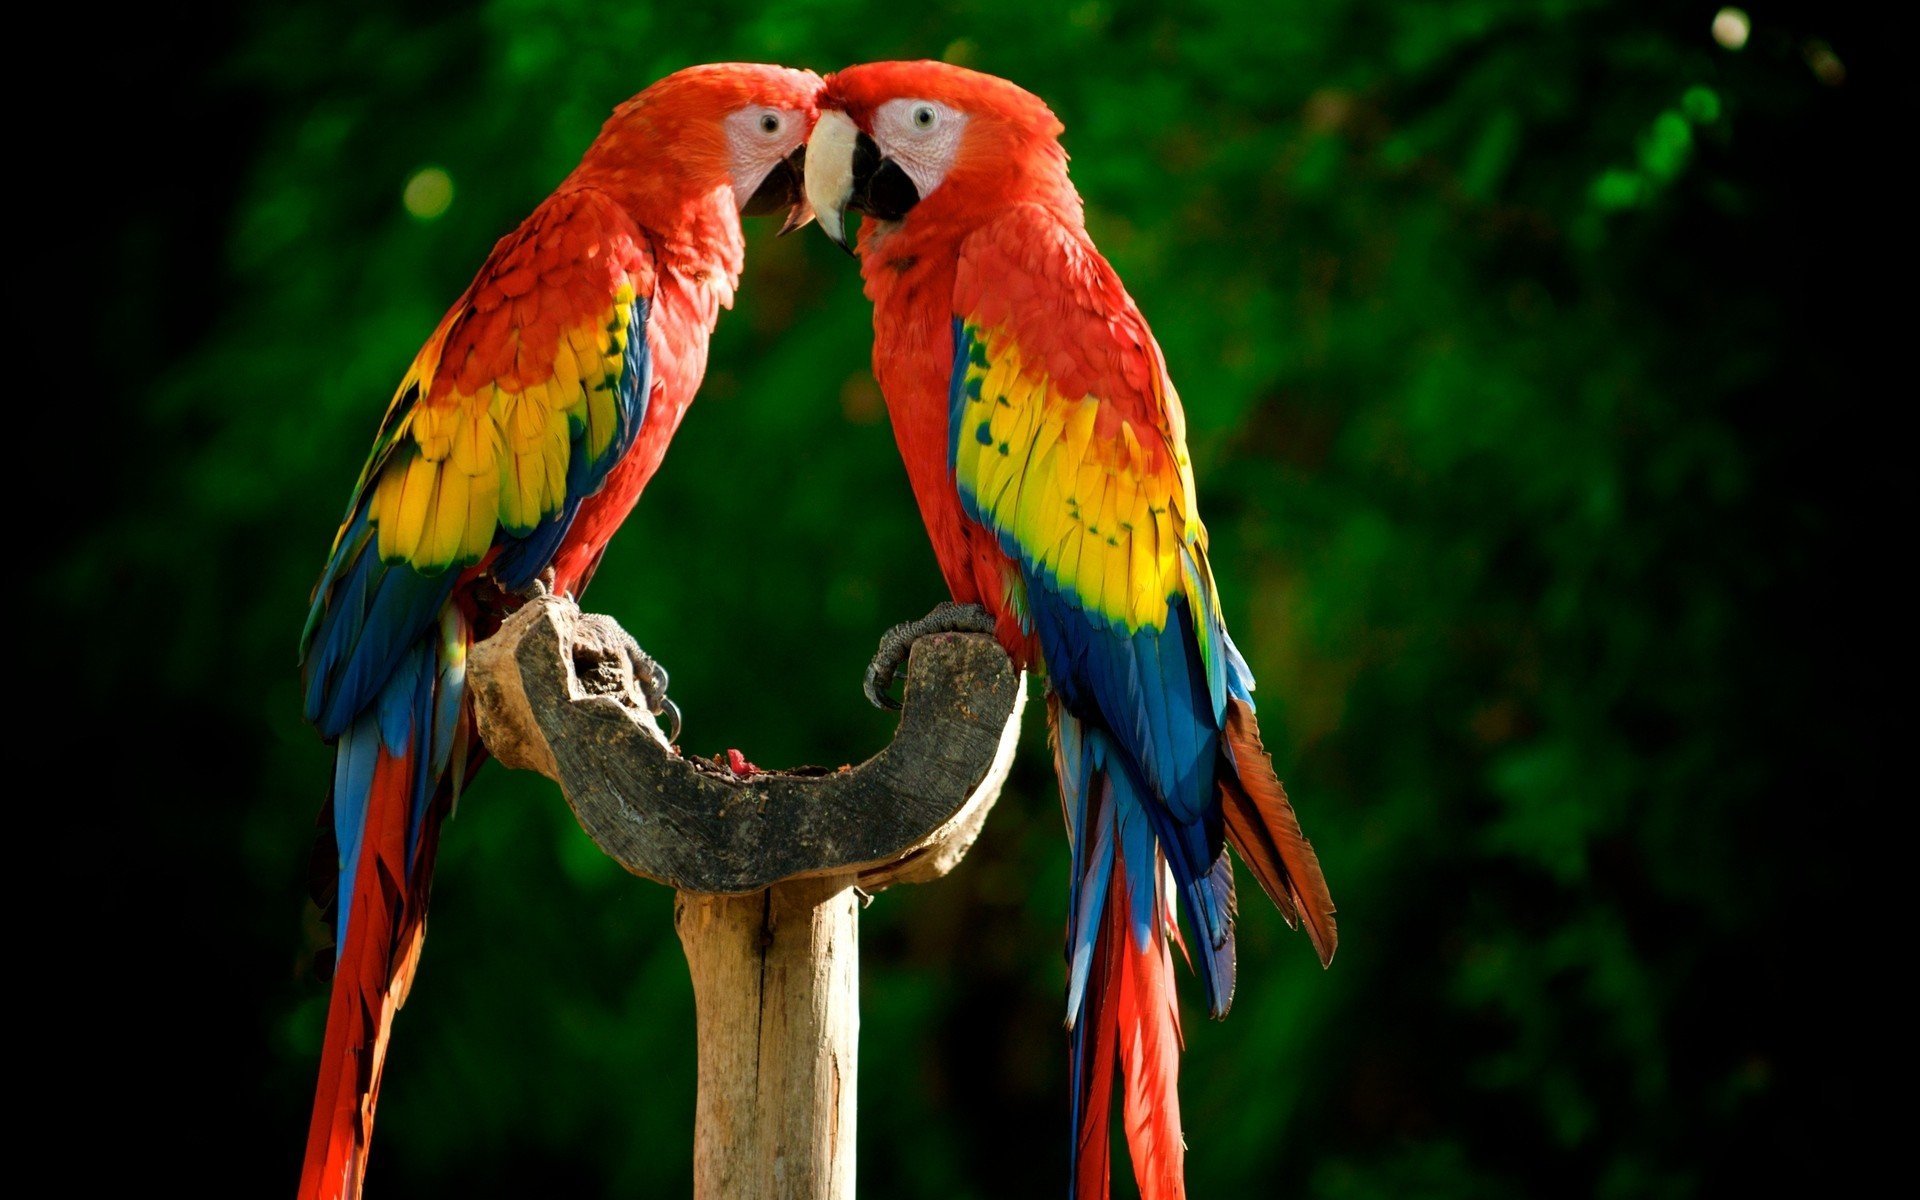 Macaw Birds Pictures 9 | HD Wallpapers (High Definition) | Free ...